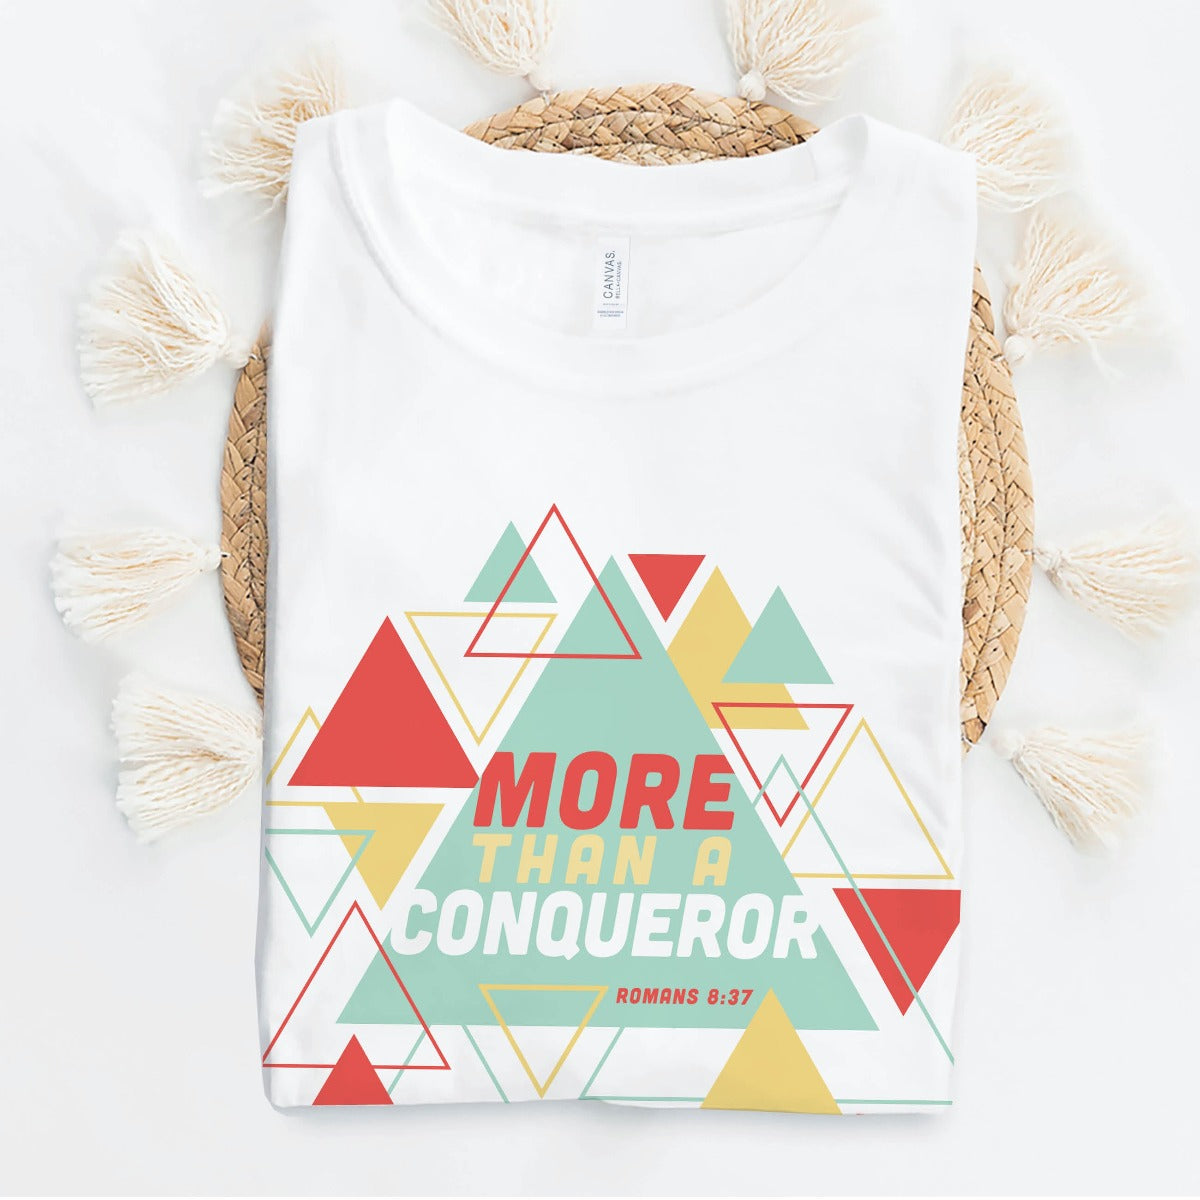 White "More Than A Conqueror" Romans 8:37 bible verse scripture unisex faith-based Christian Bella Canvas 3001 t-shirt, with bright and colorful geometric triangles pattern, made in the USA for Men and Women Jesus believers